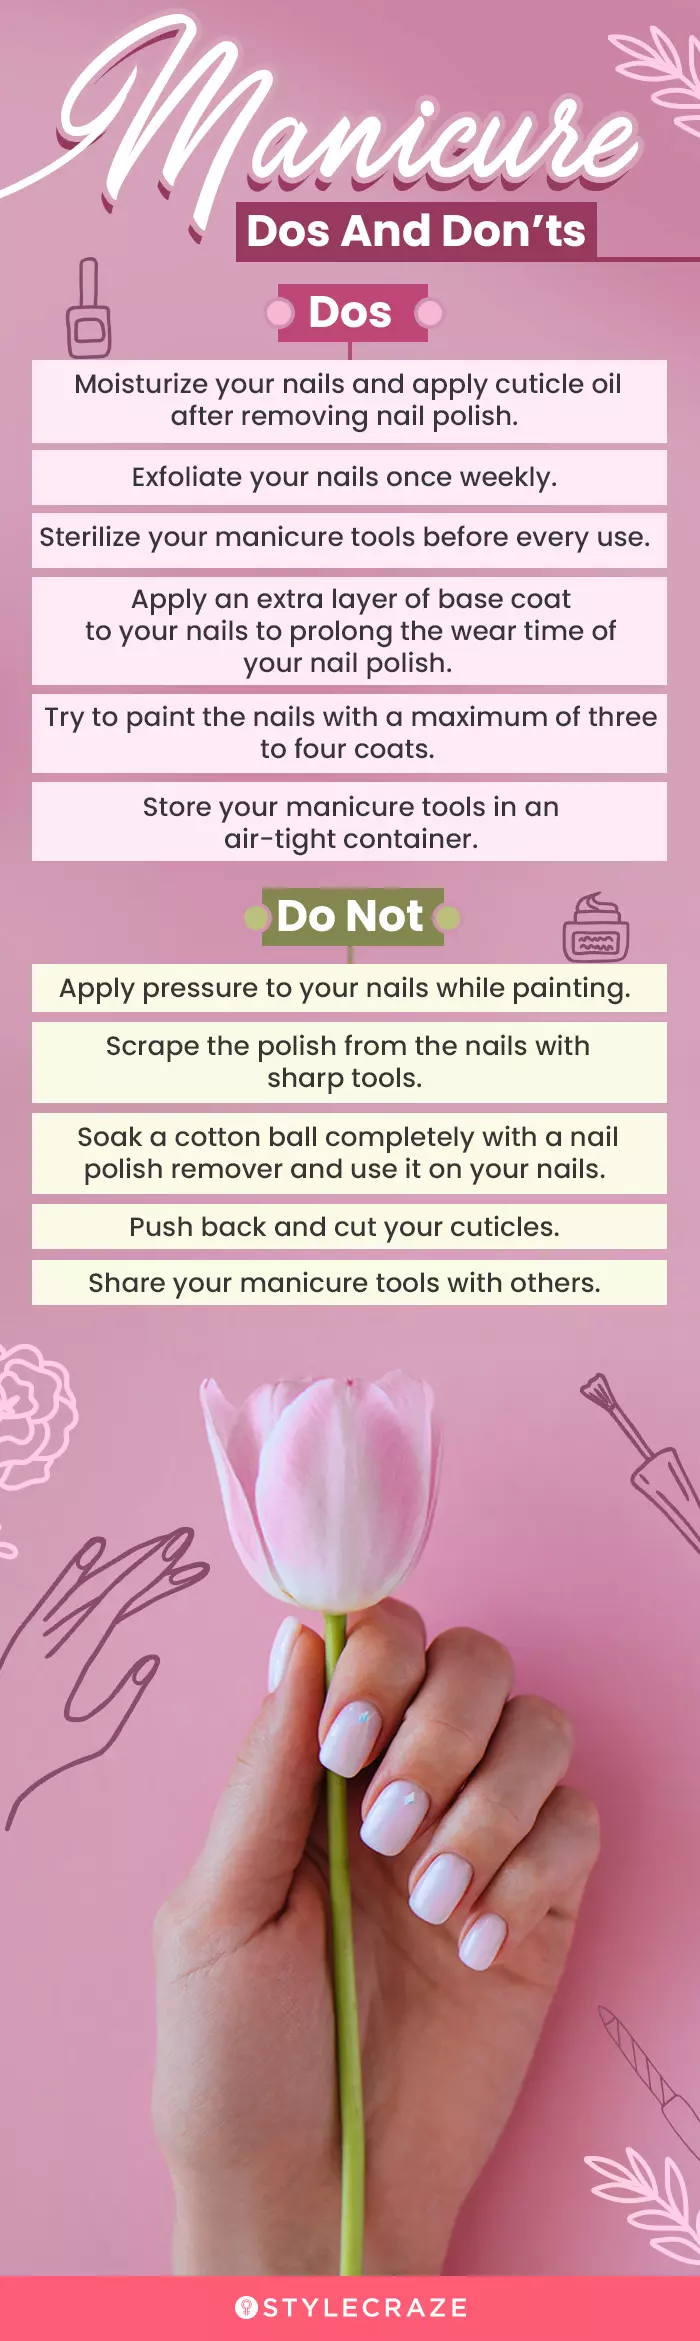 Manicure Dos And Don’ts (infographic)